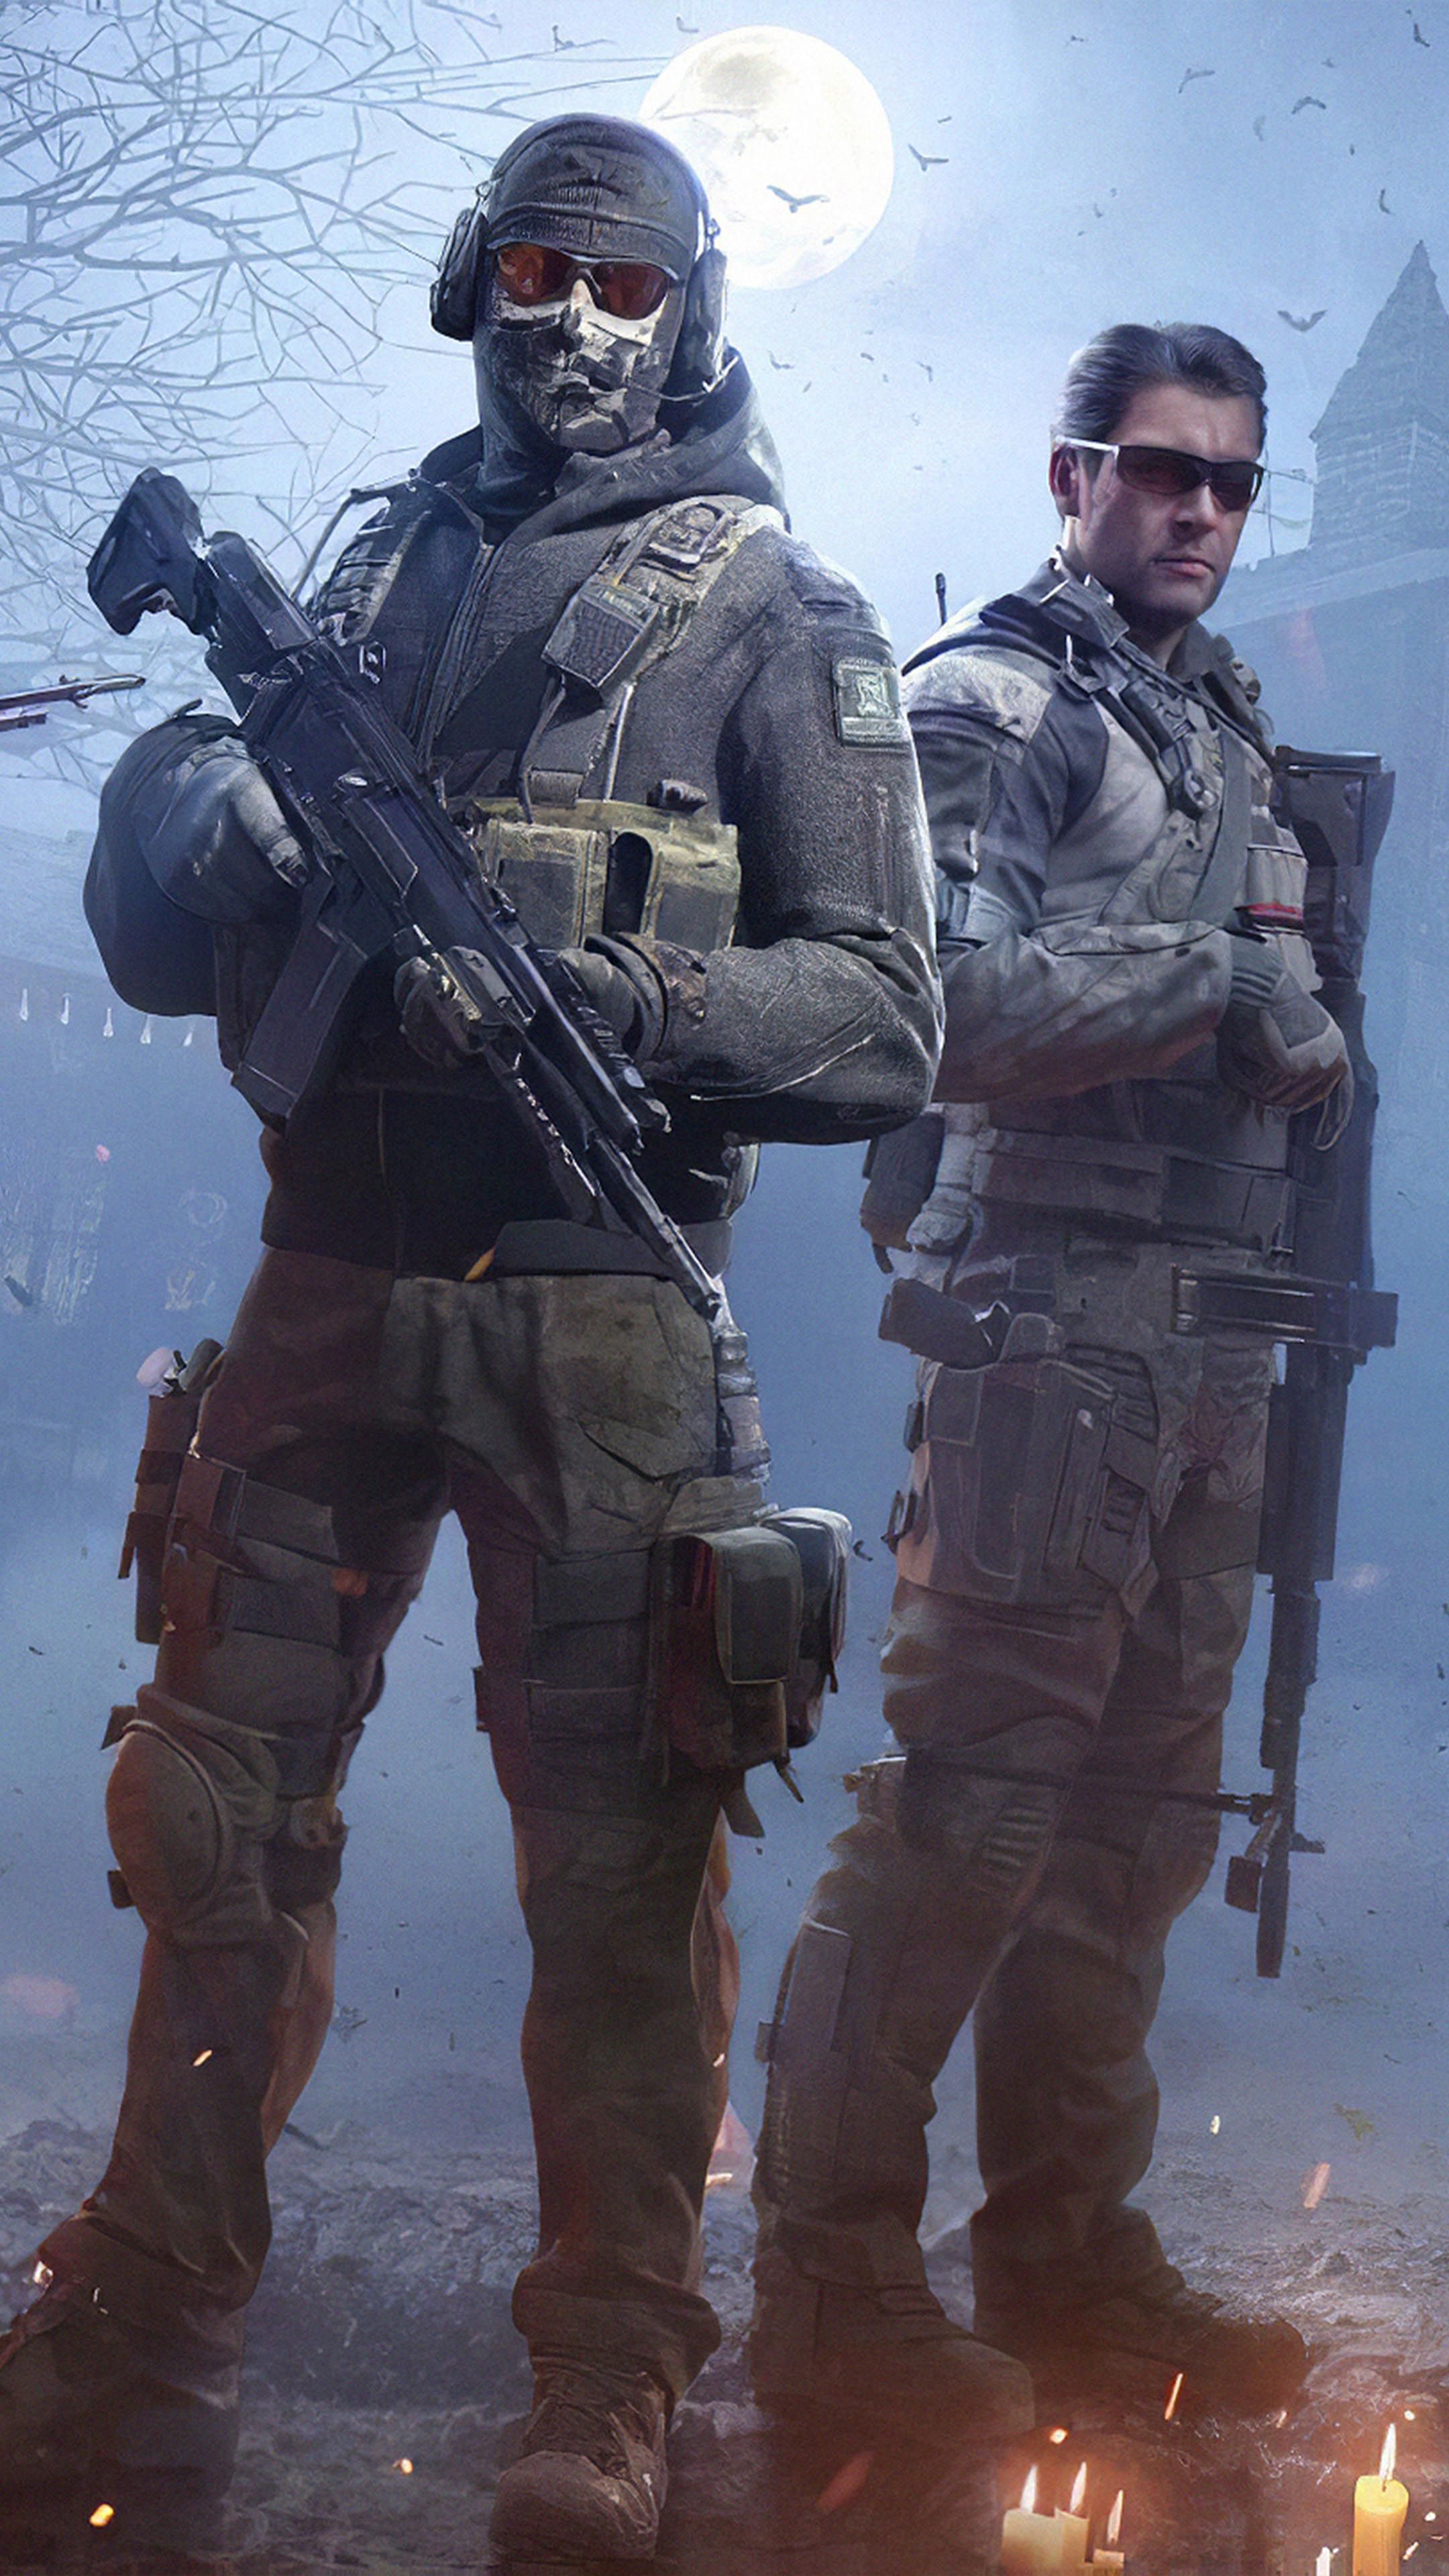 Squad Call of Duty Mobile 4K Ultra HD Mobile Wallpaper. Call off duty, Call of duty, Call of duty black